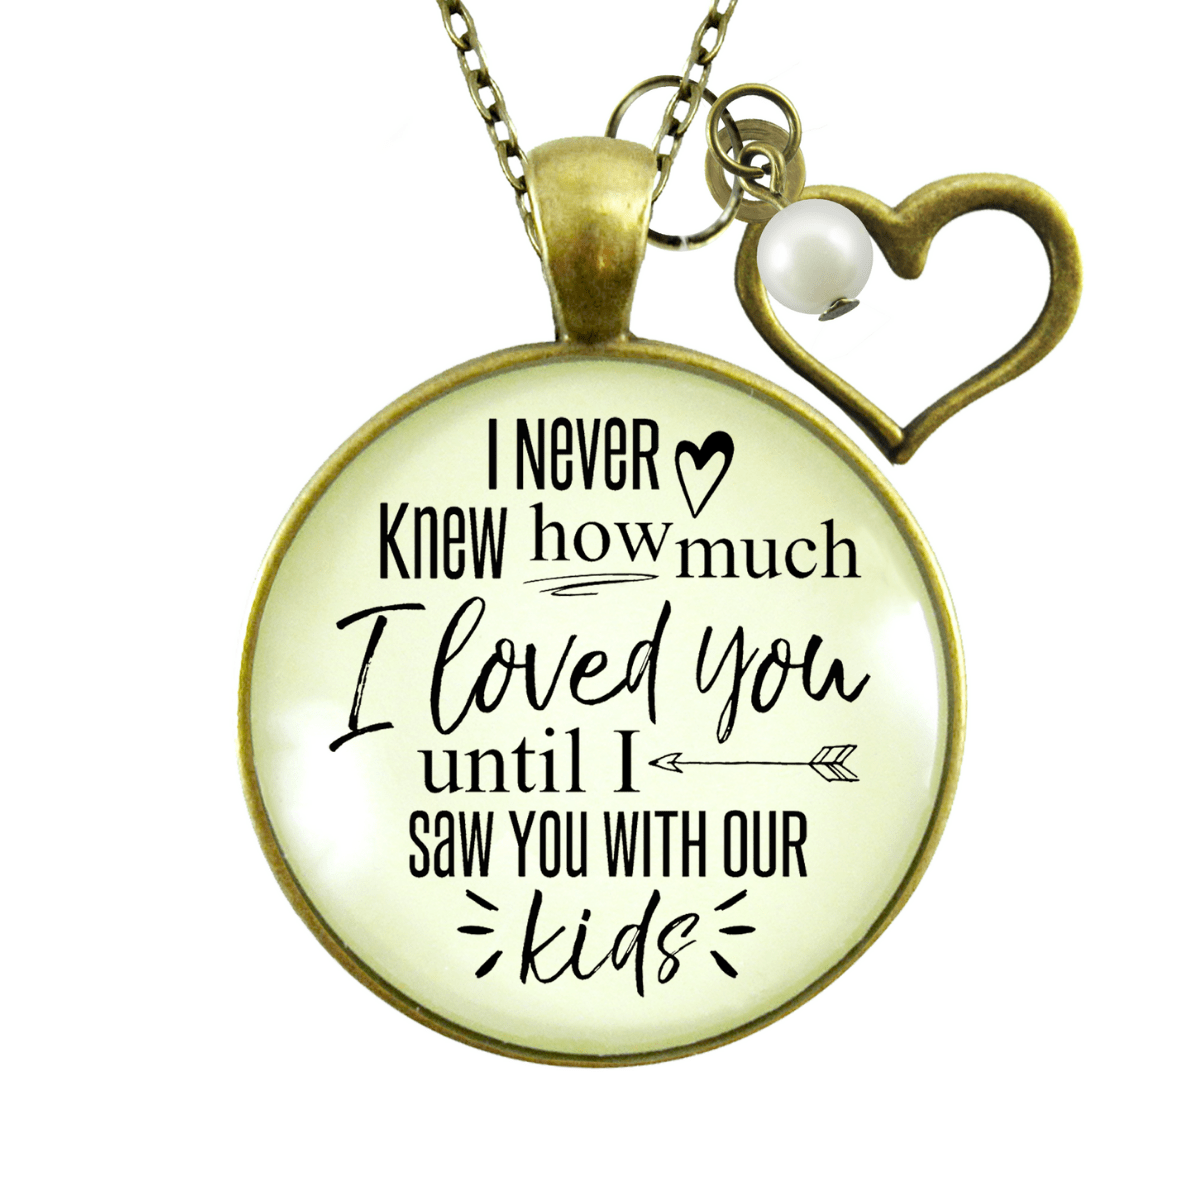 Gutsy Goodness Wife Necklace New Mom I Never Knew How Love Until Kids Gift Jewelry - Gutsy Goodness;Wife Necklace New Mom I Never Knew How Love Until Kids Gift Jewelry - Gutsy Goodness Handmade Jewelry Gifts